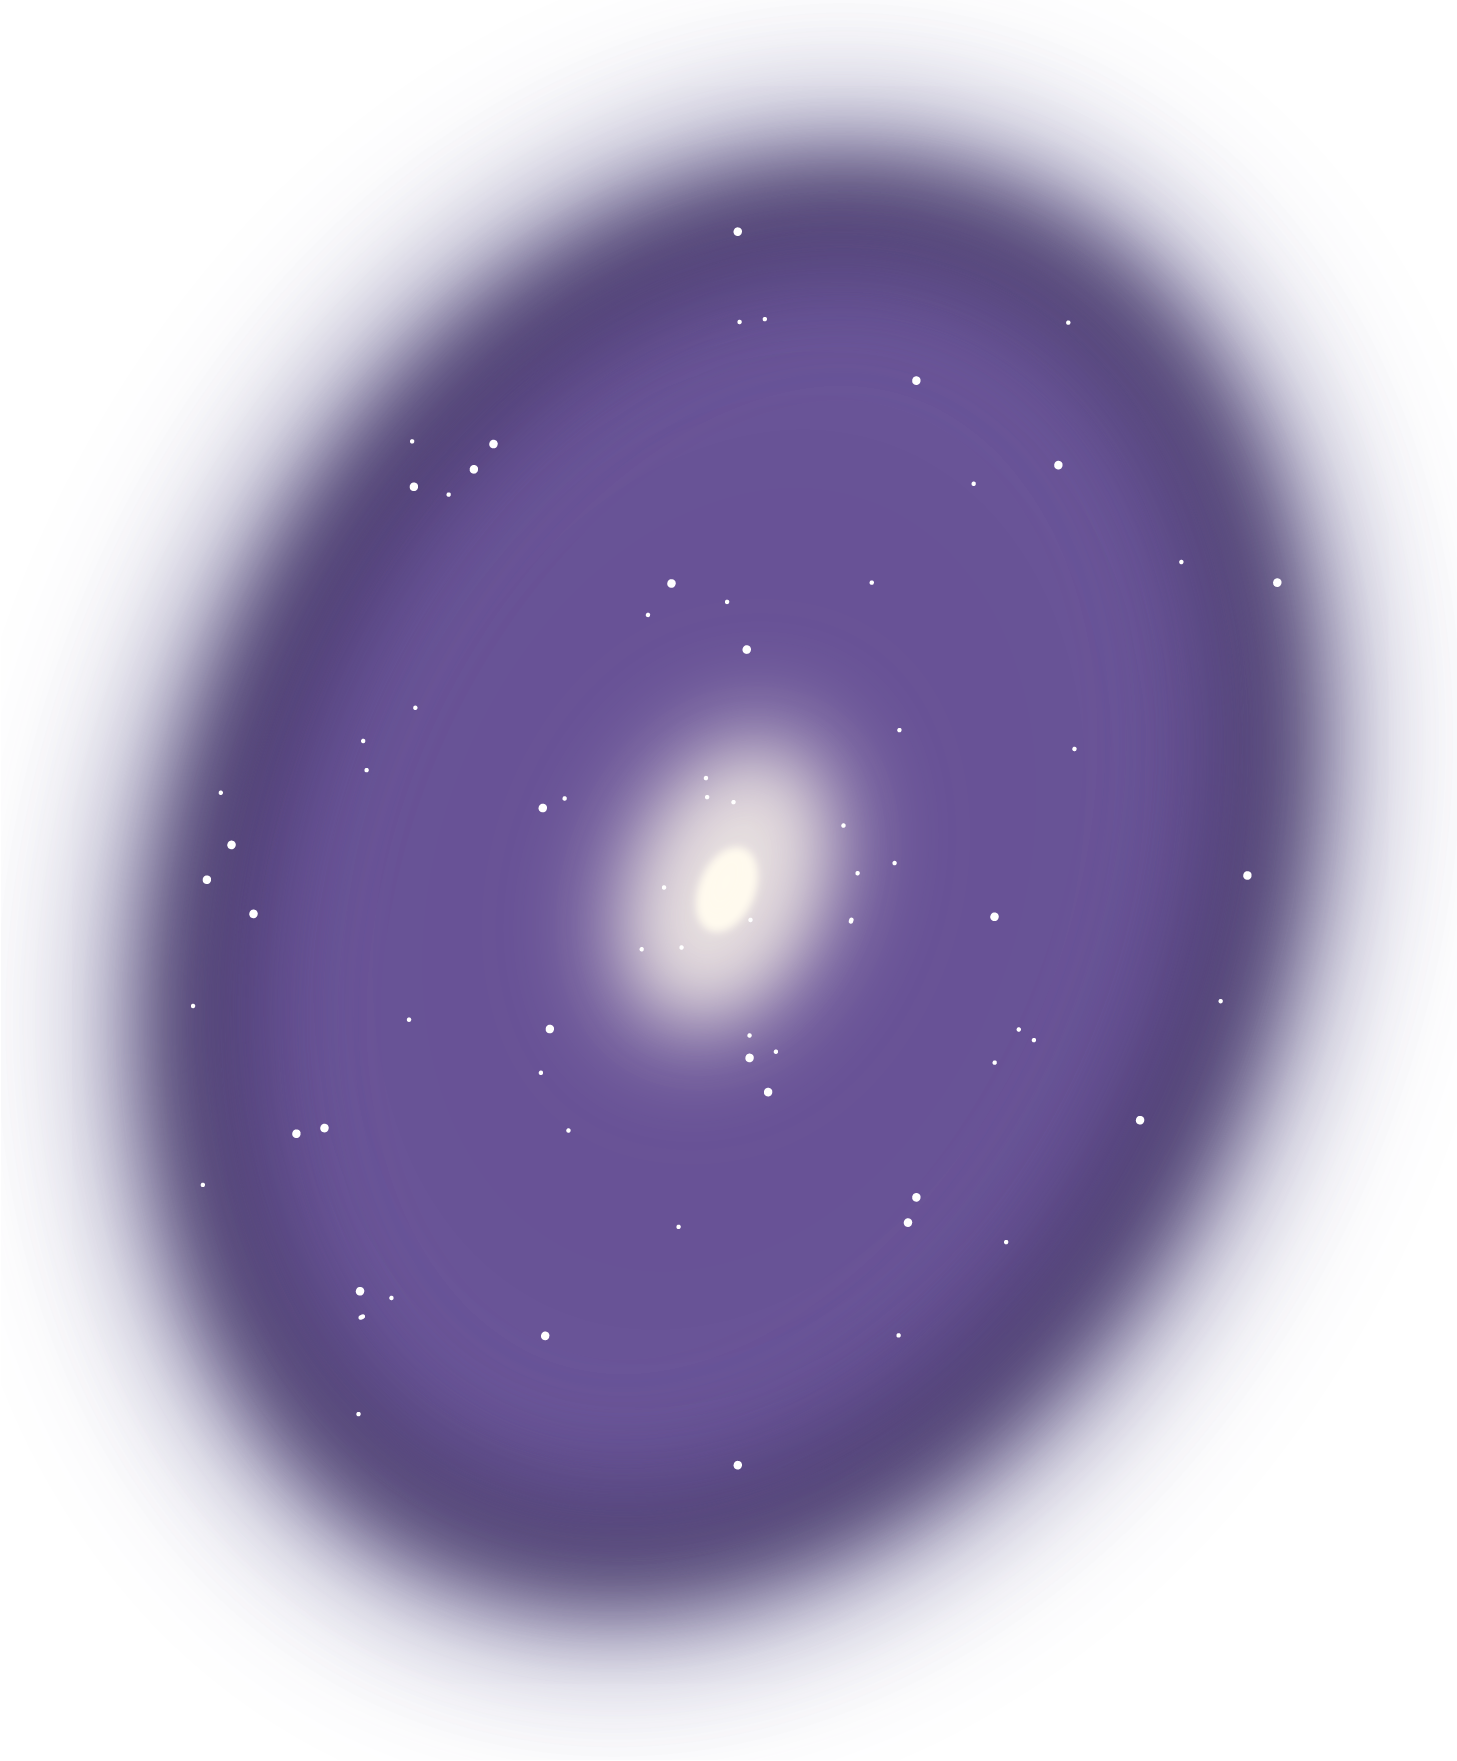 A diffuse oval is outlined by dark purple but is primarily a medium, bright purple except for the center, a bright white spot surrounded by a small ring of white haze. White dots representing stars speckle the image.